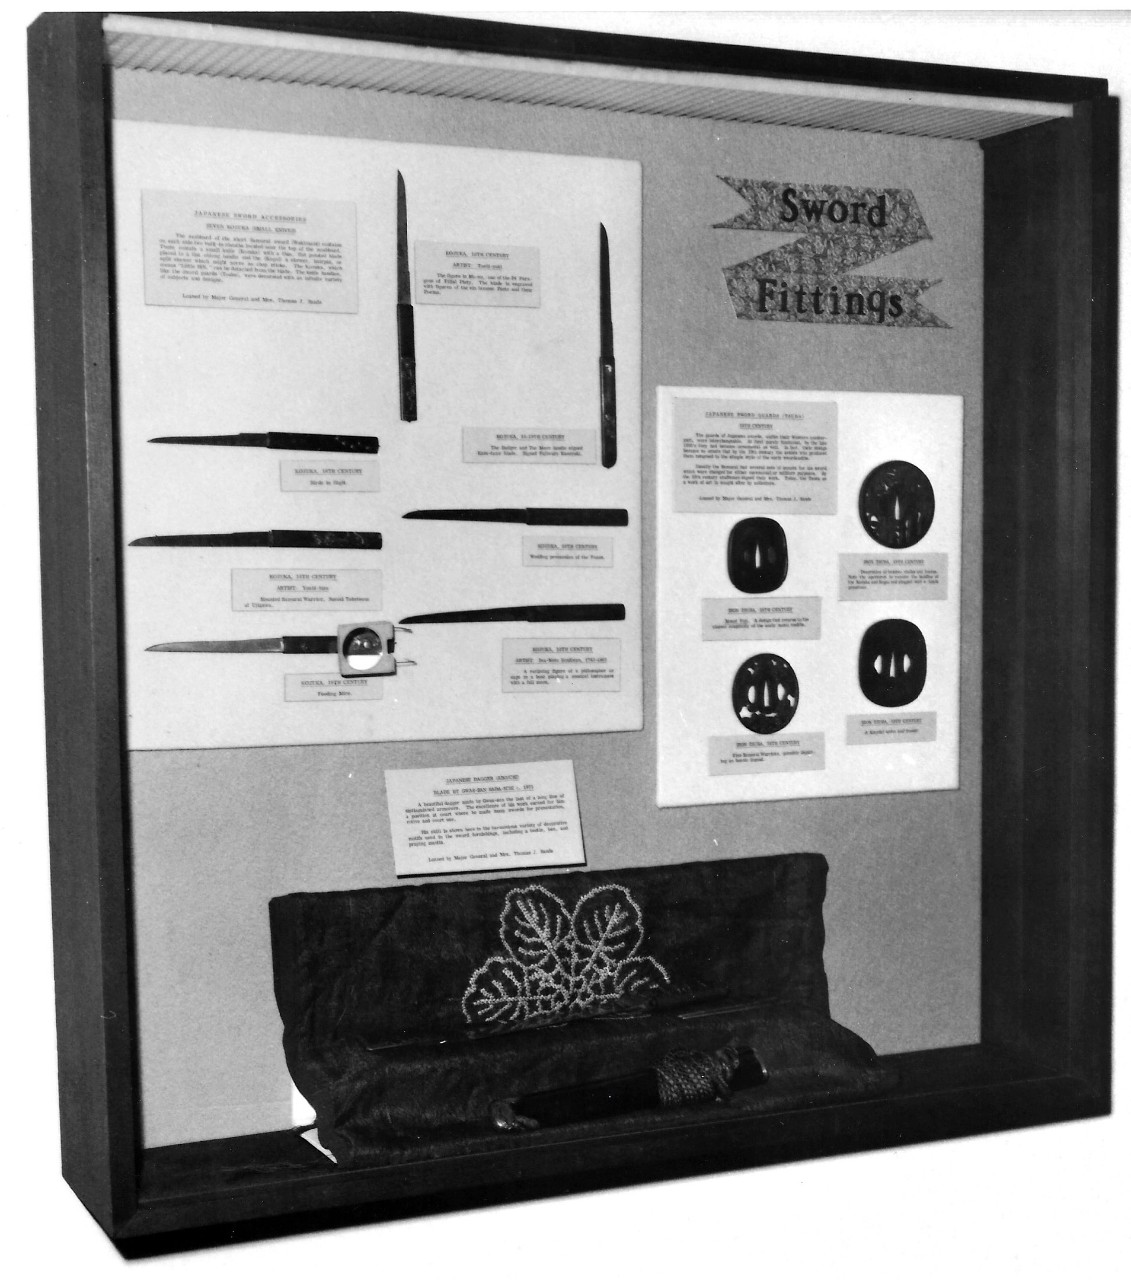 Samurai Swords Exhibit. The Navy Memorial Museum (now National Museum of the Navy). Shown: Sword and Fittings exhibit case. Exhibit was held from November 1977 to January 1978 and displayed thirty-seven swords from the collection of David E. J. P...